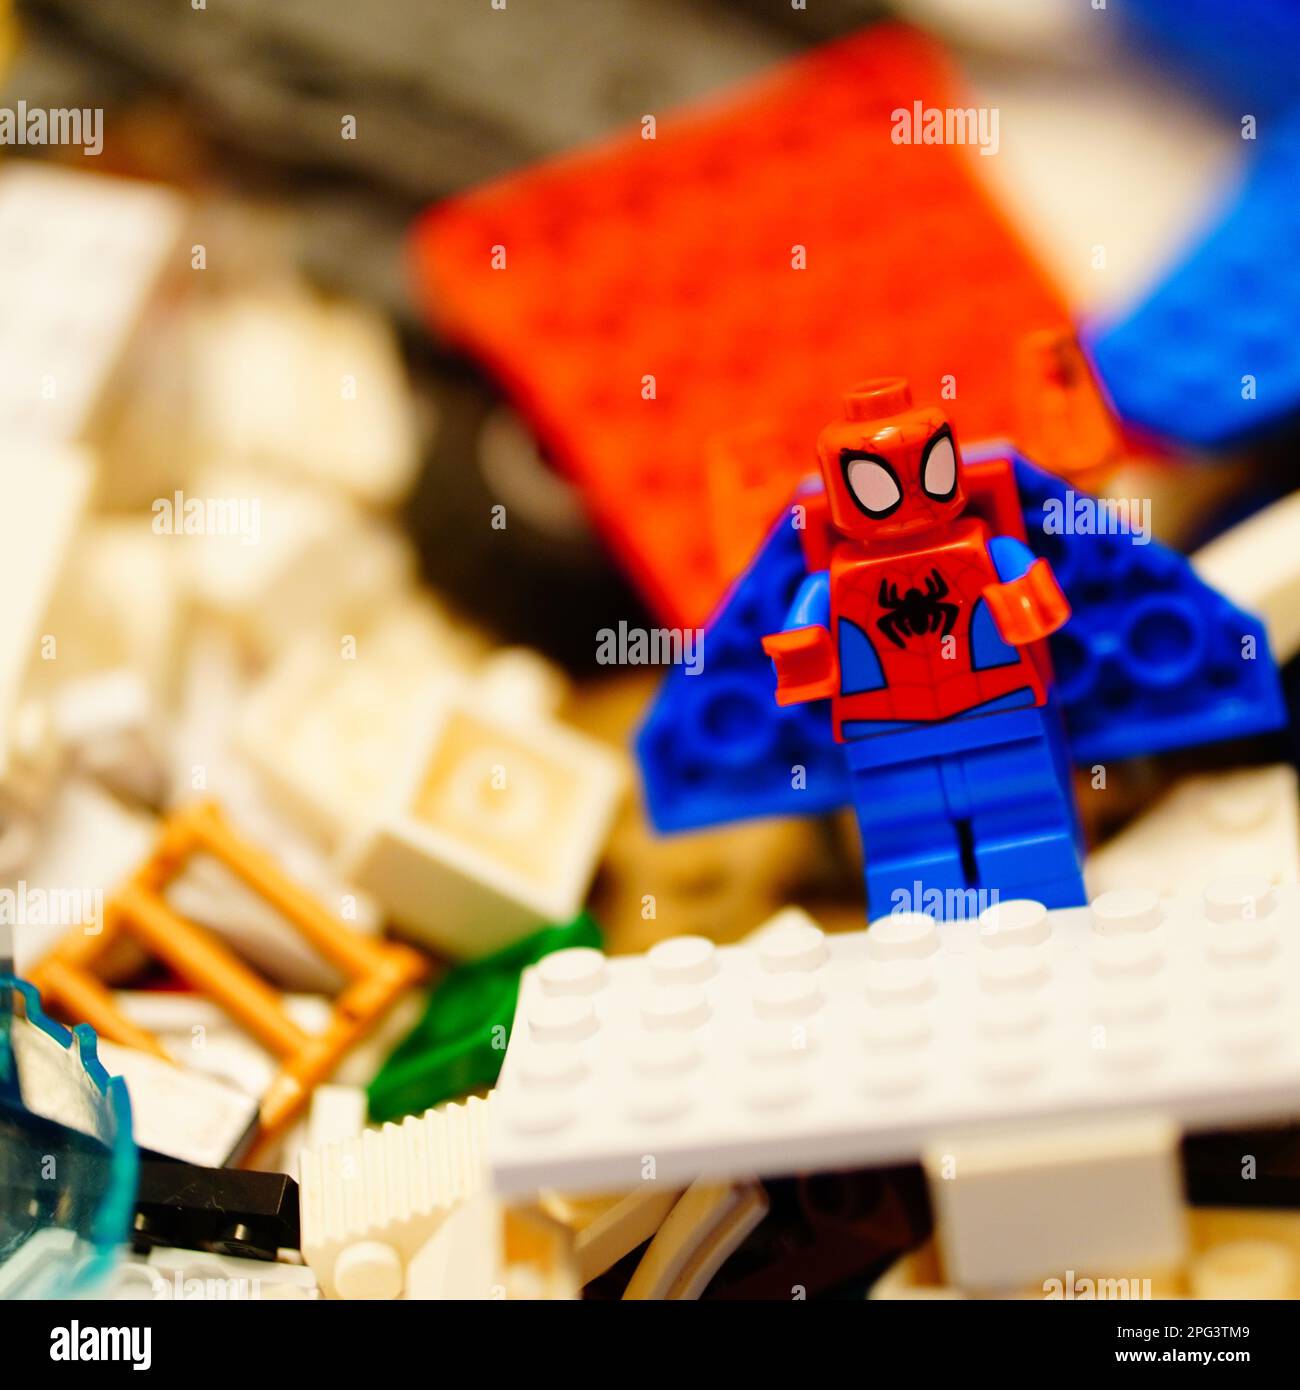 A Lego figurine of Spider-Man in the pile of Lego blocks Stock Photo - Alamy